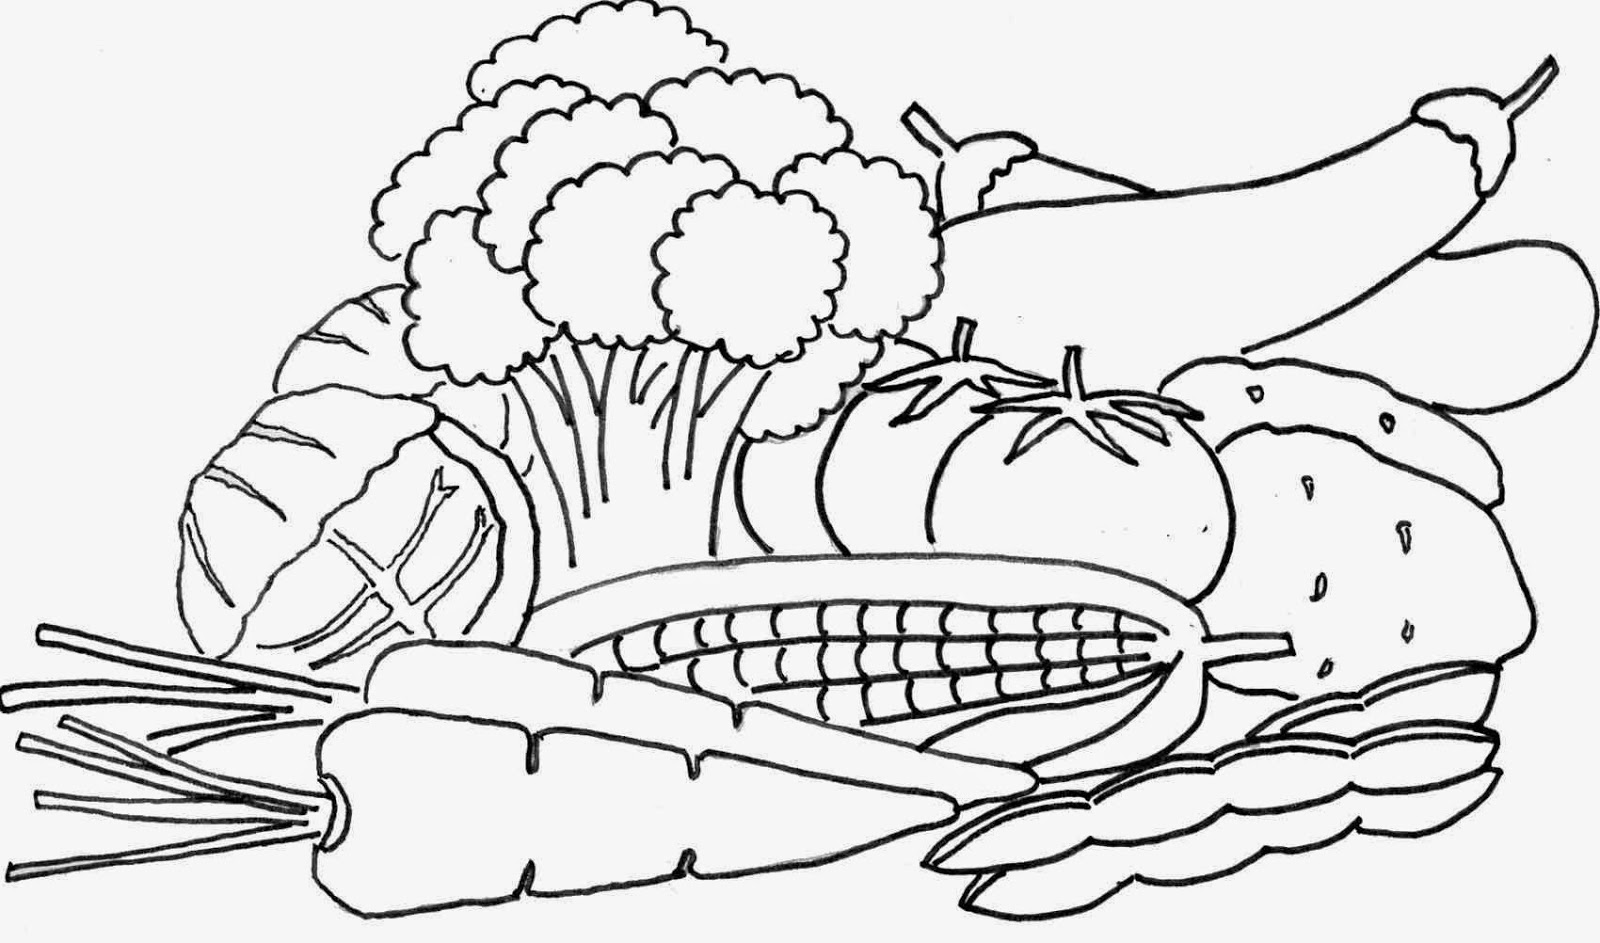 printable vegetable coloring pages vegetables coloring pages getcoloringpagescom coloring vegetable printable pages 